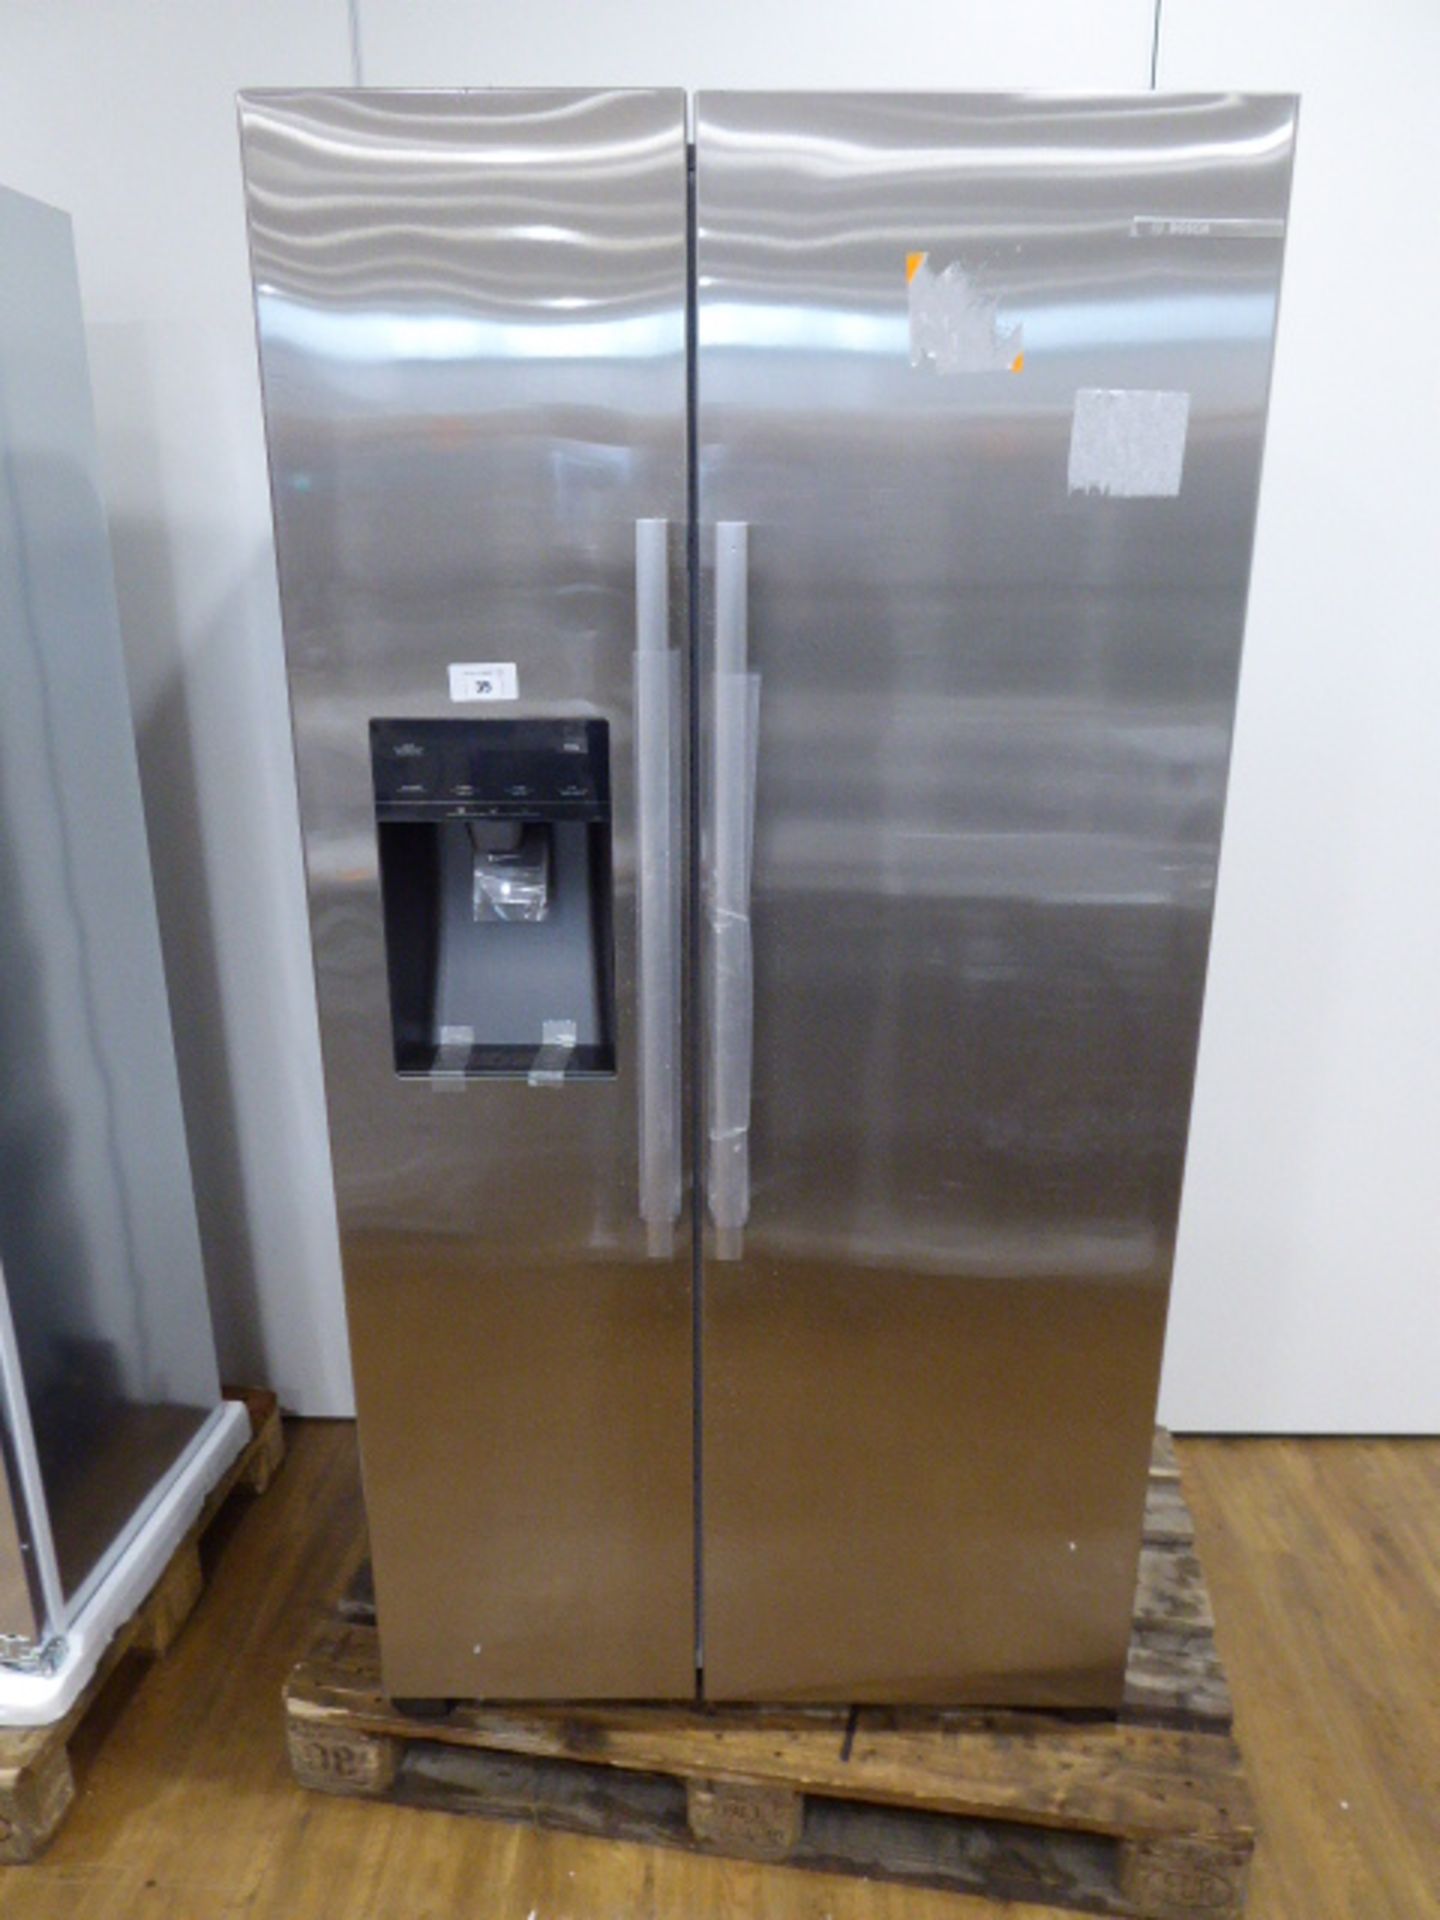 KAD93VIFPGB Bosch Side-by-side fridge-freezer No visible dents, marks or scratches. Slight paint